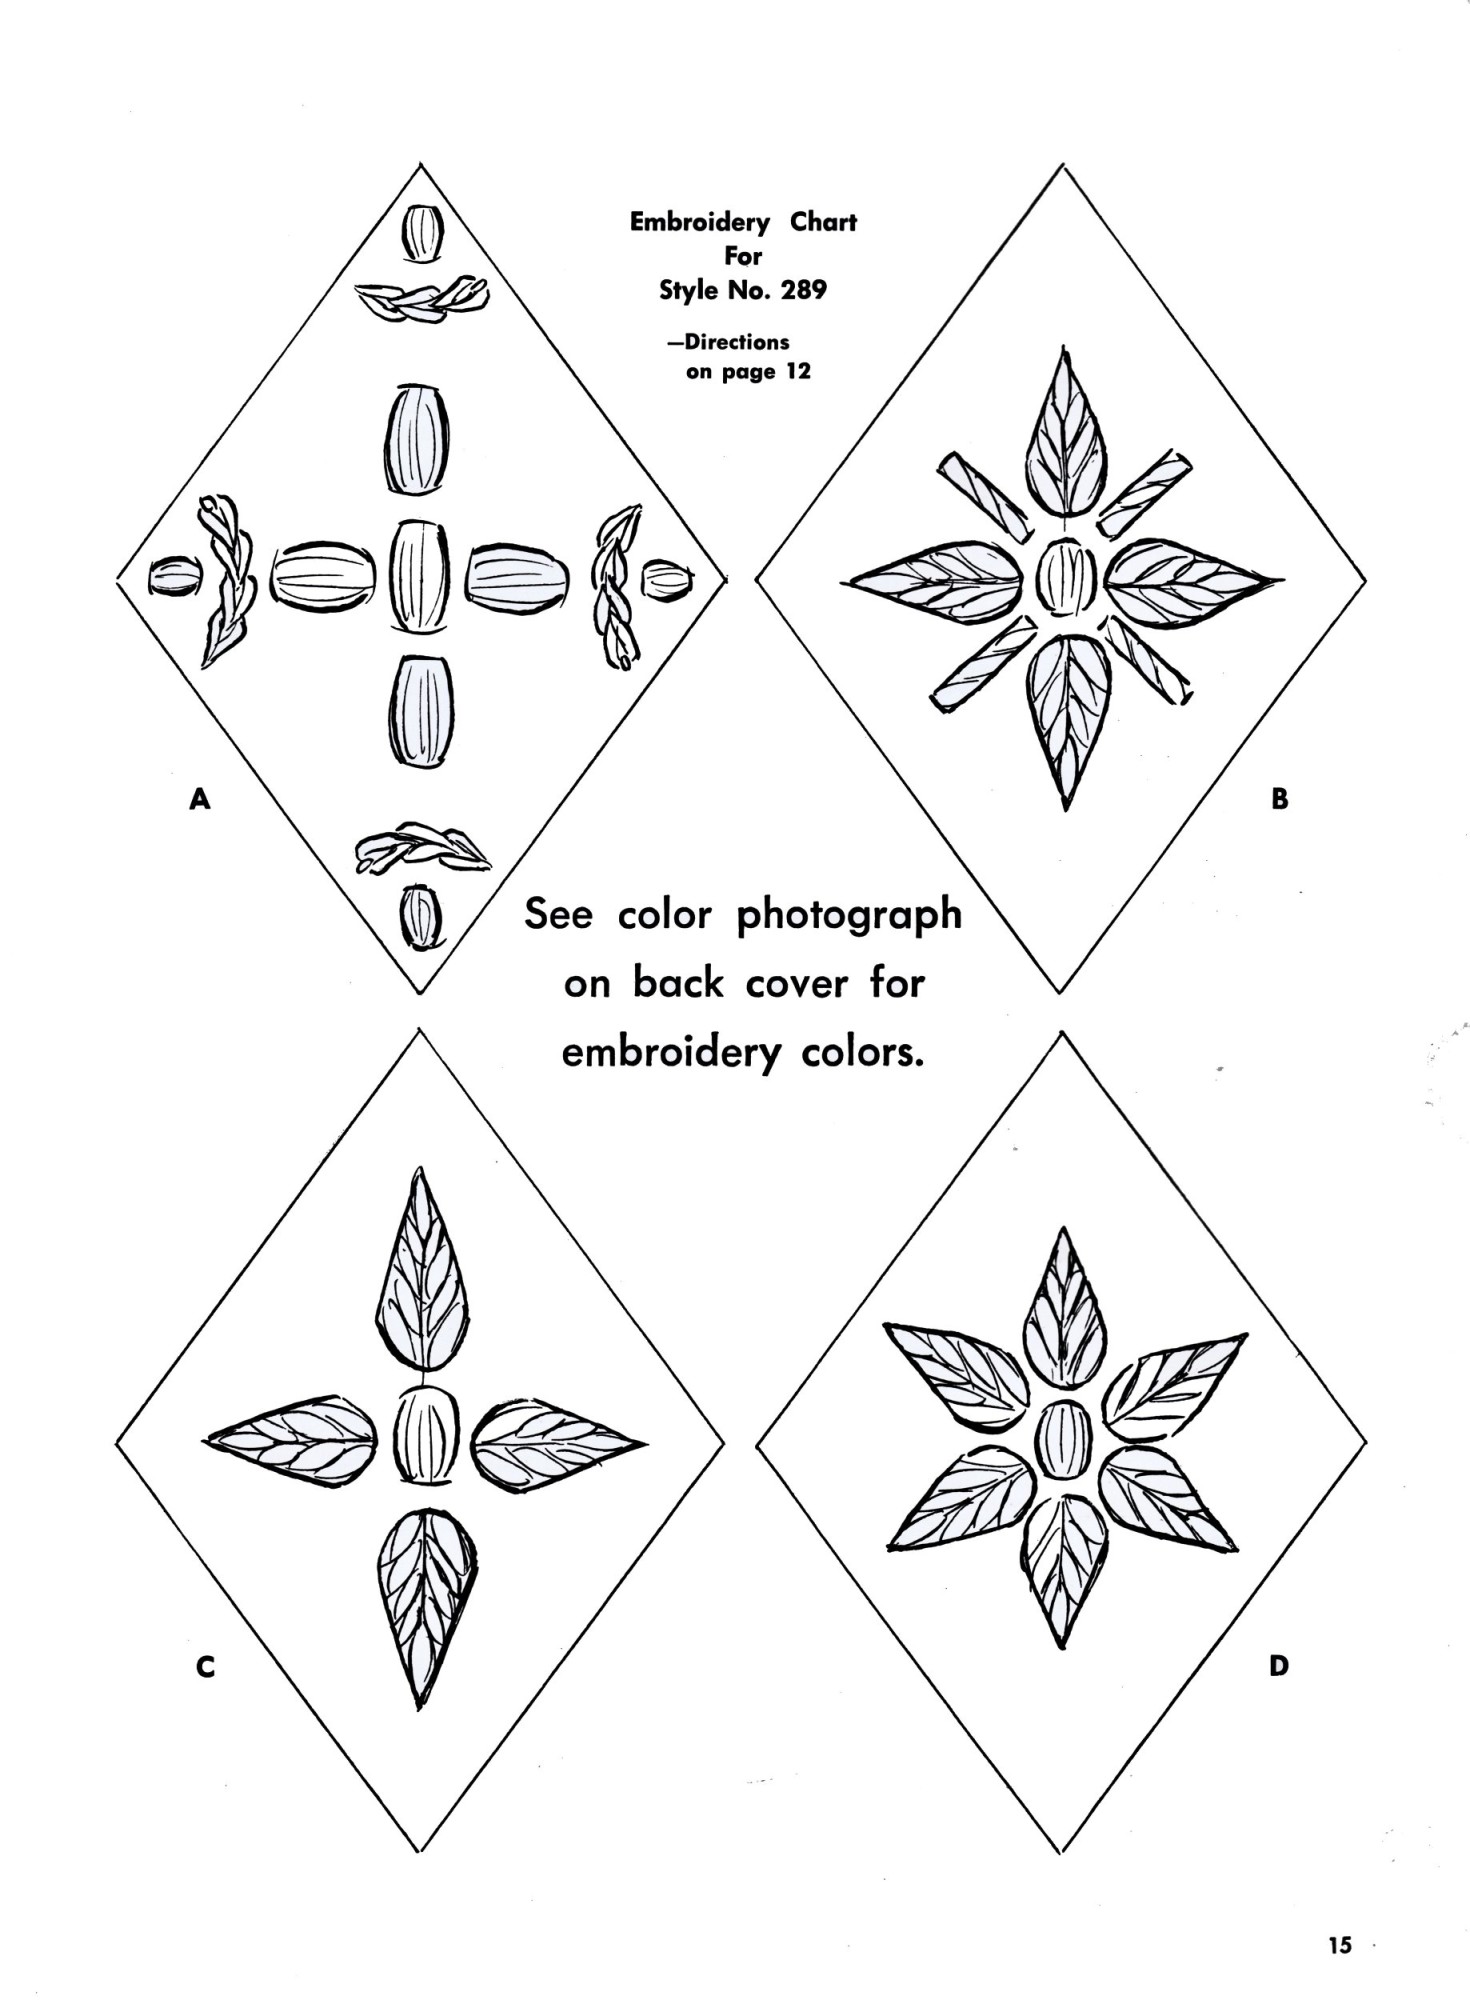 Embroidery Chart for Style No. 289 Directions on page 12